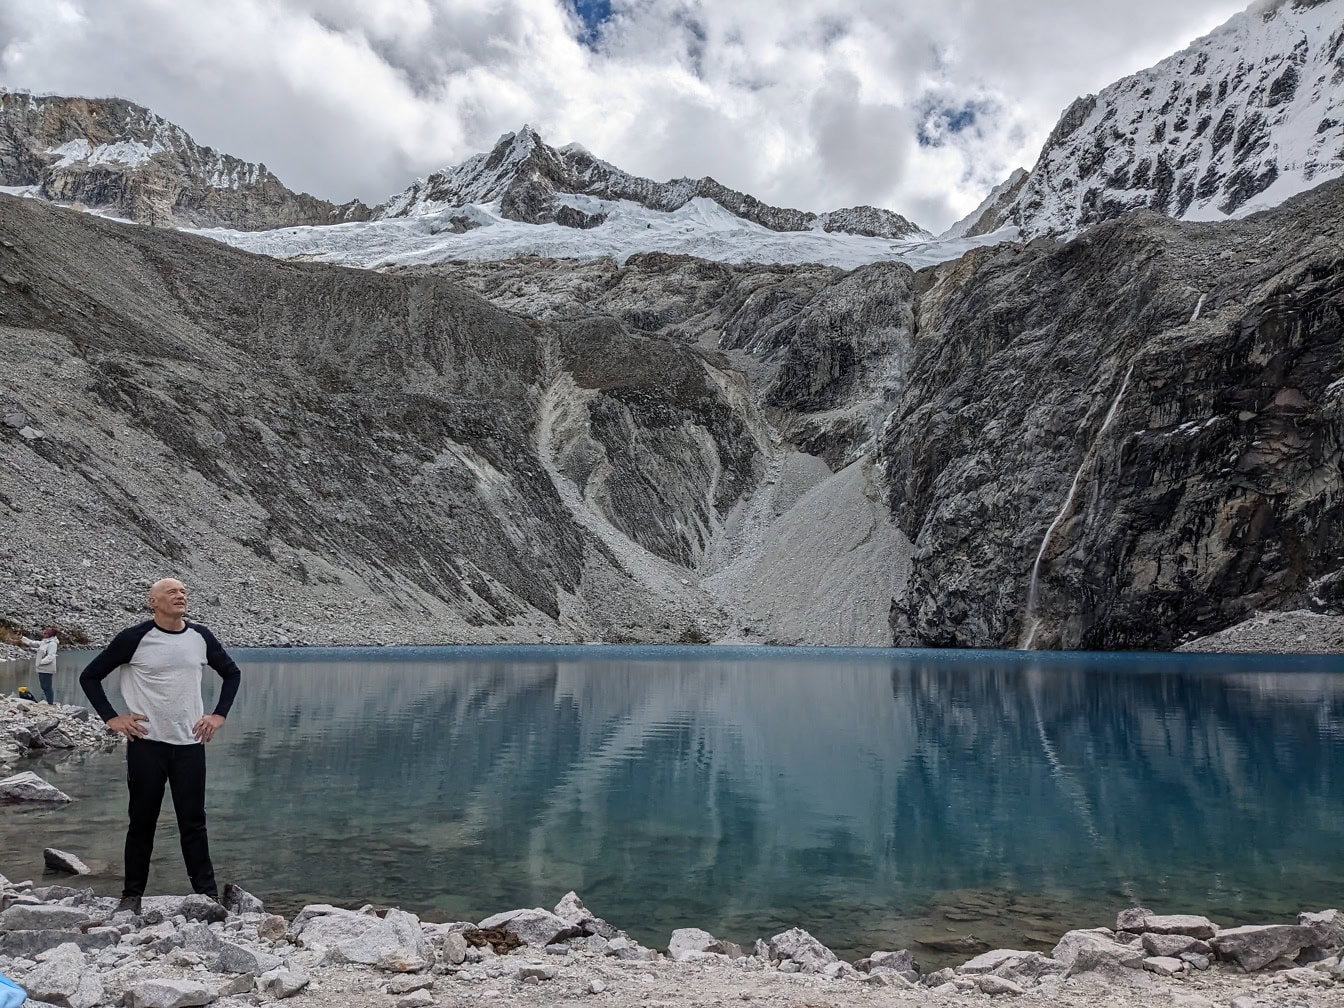 Man standing on a rocky shore of the Lake 69 or Laguna 69 in Huascaran national park near the Huaraz in Peru, landscape of a Latin America